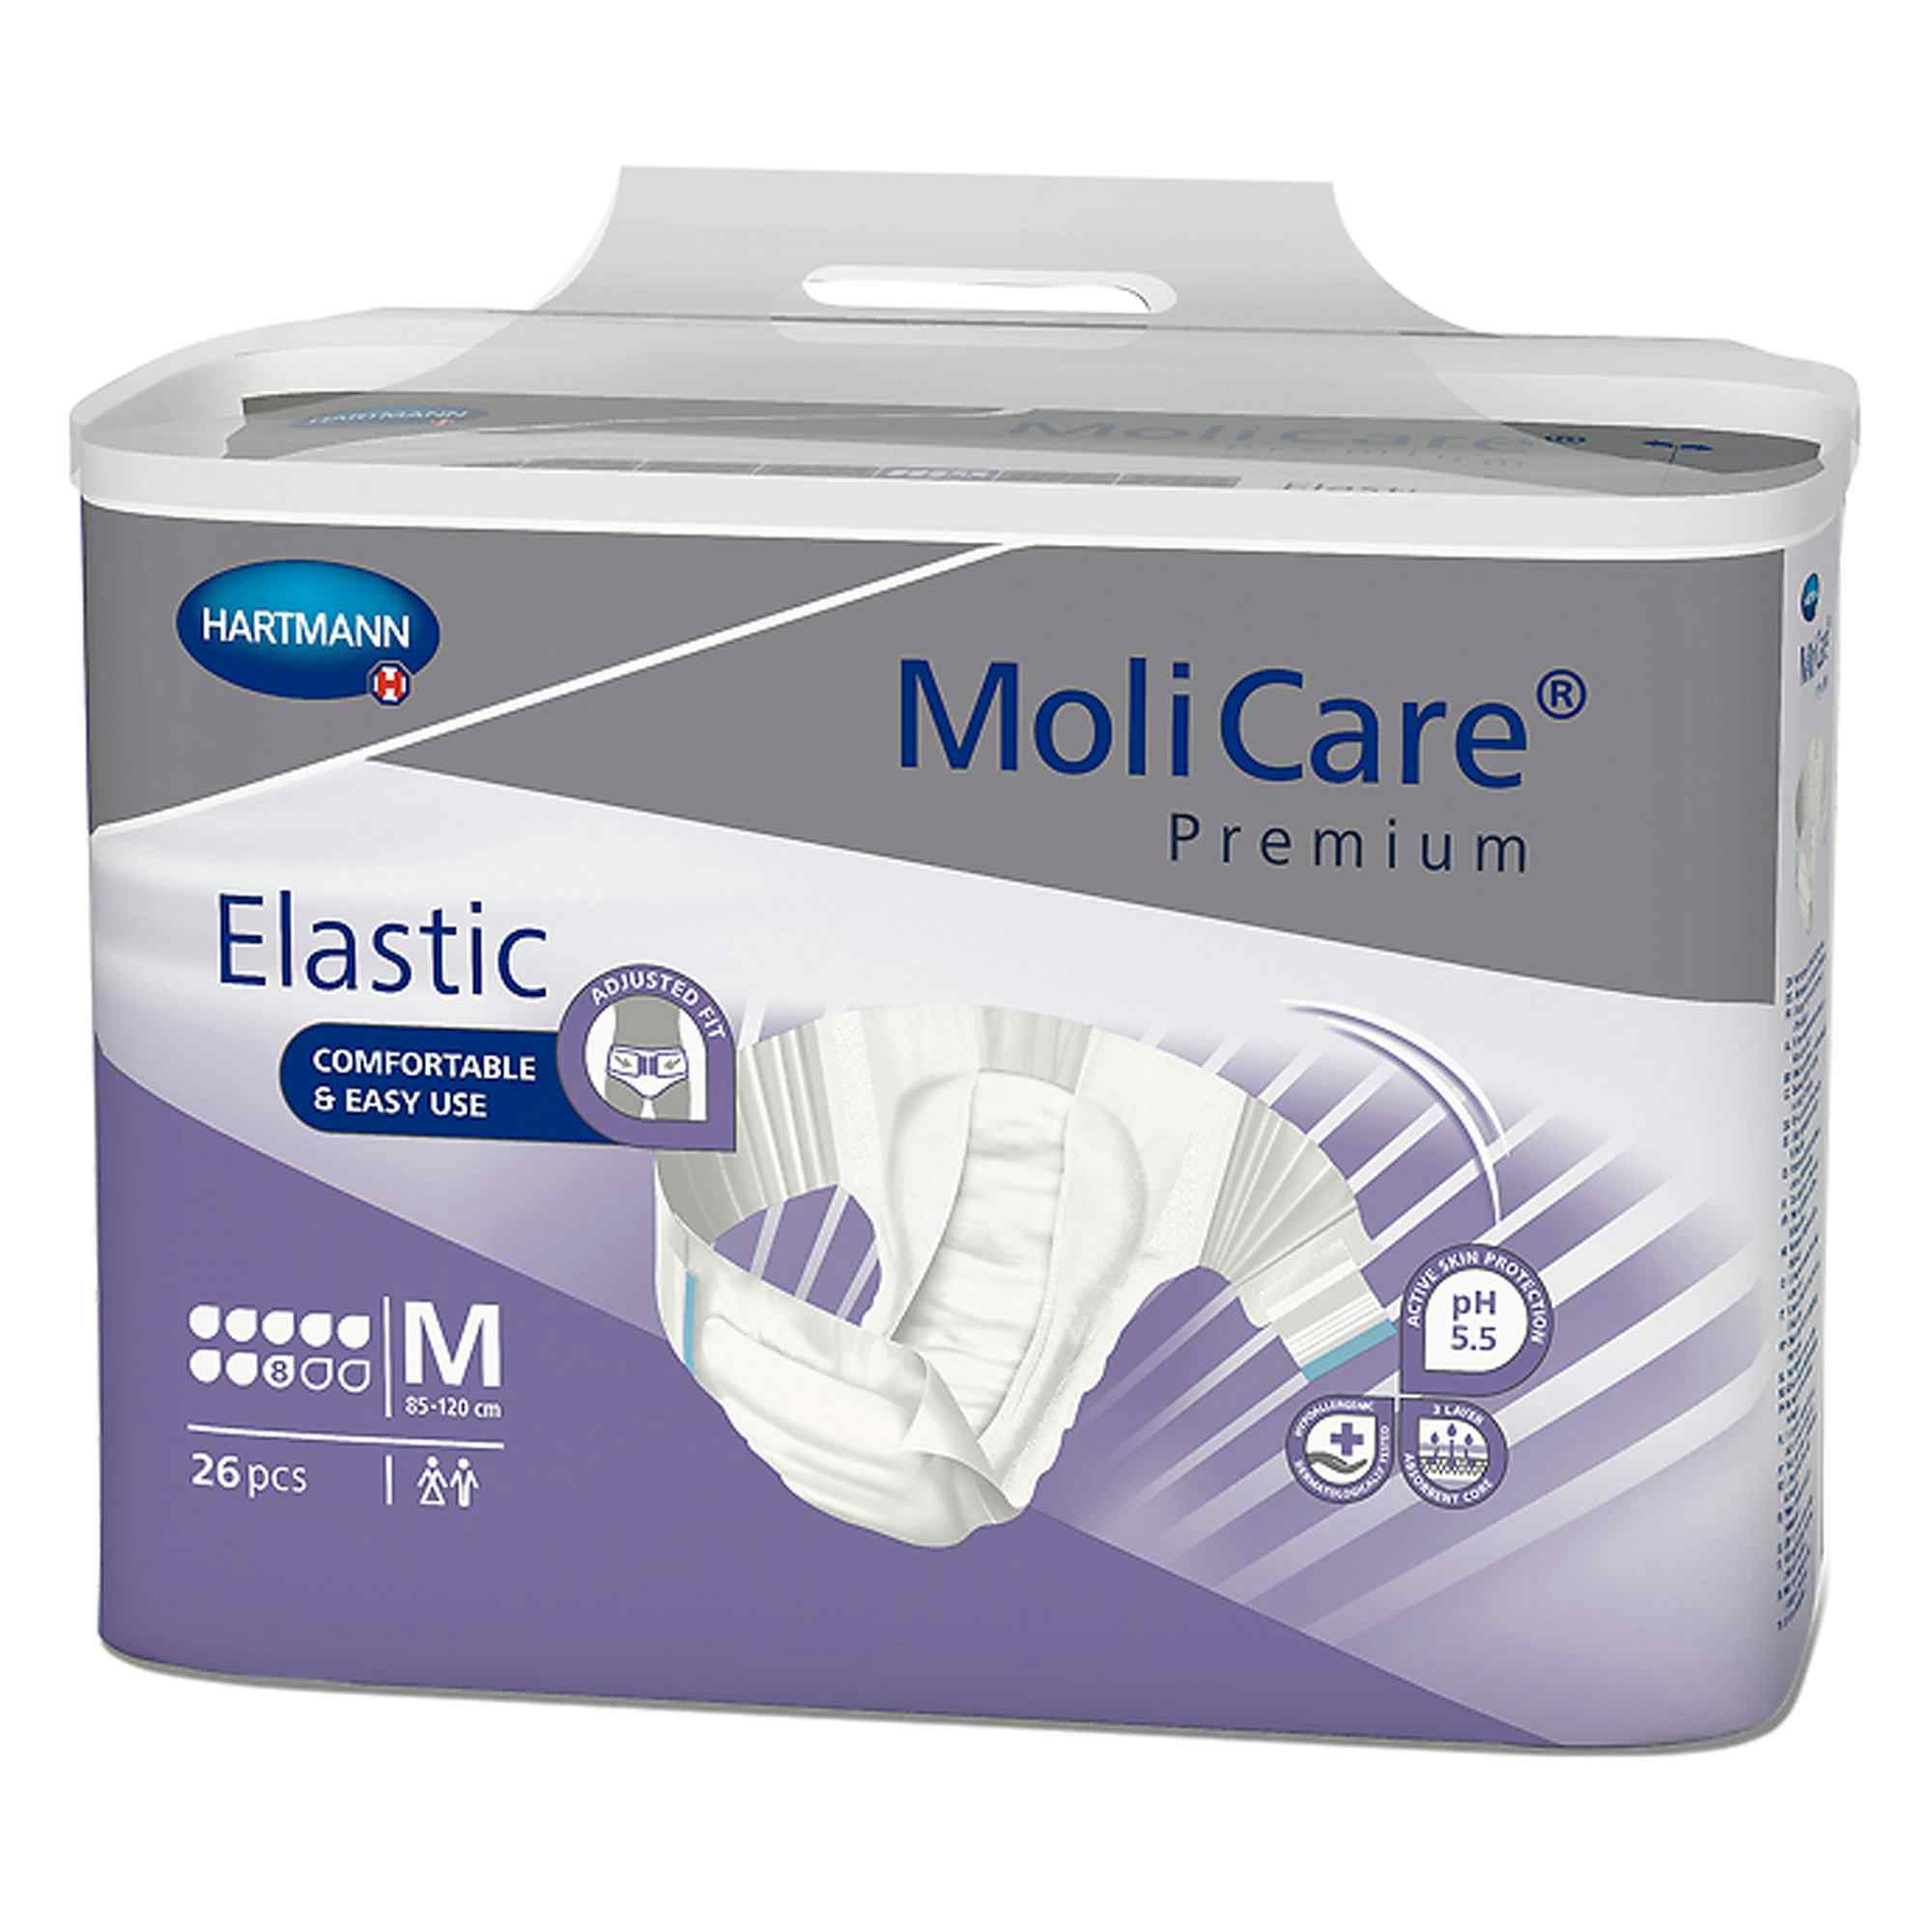 MoliCare Premium 8D Elastic Disposable Brief Adult Diapers with Tabs, Heavy Absorbency, 165472, Medium (33-47") - Case of 67